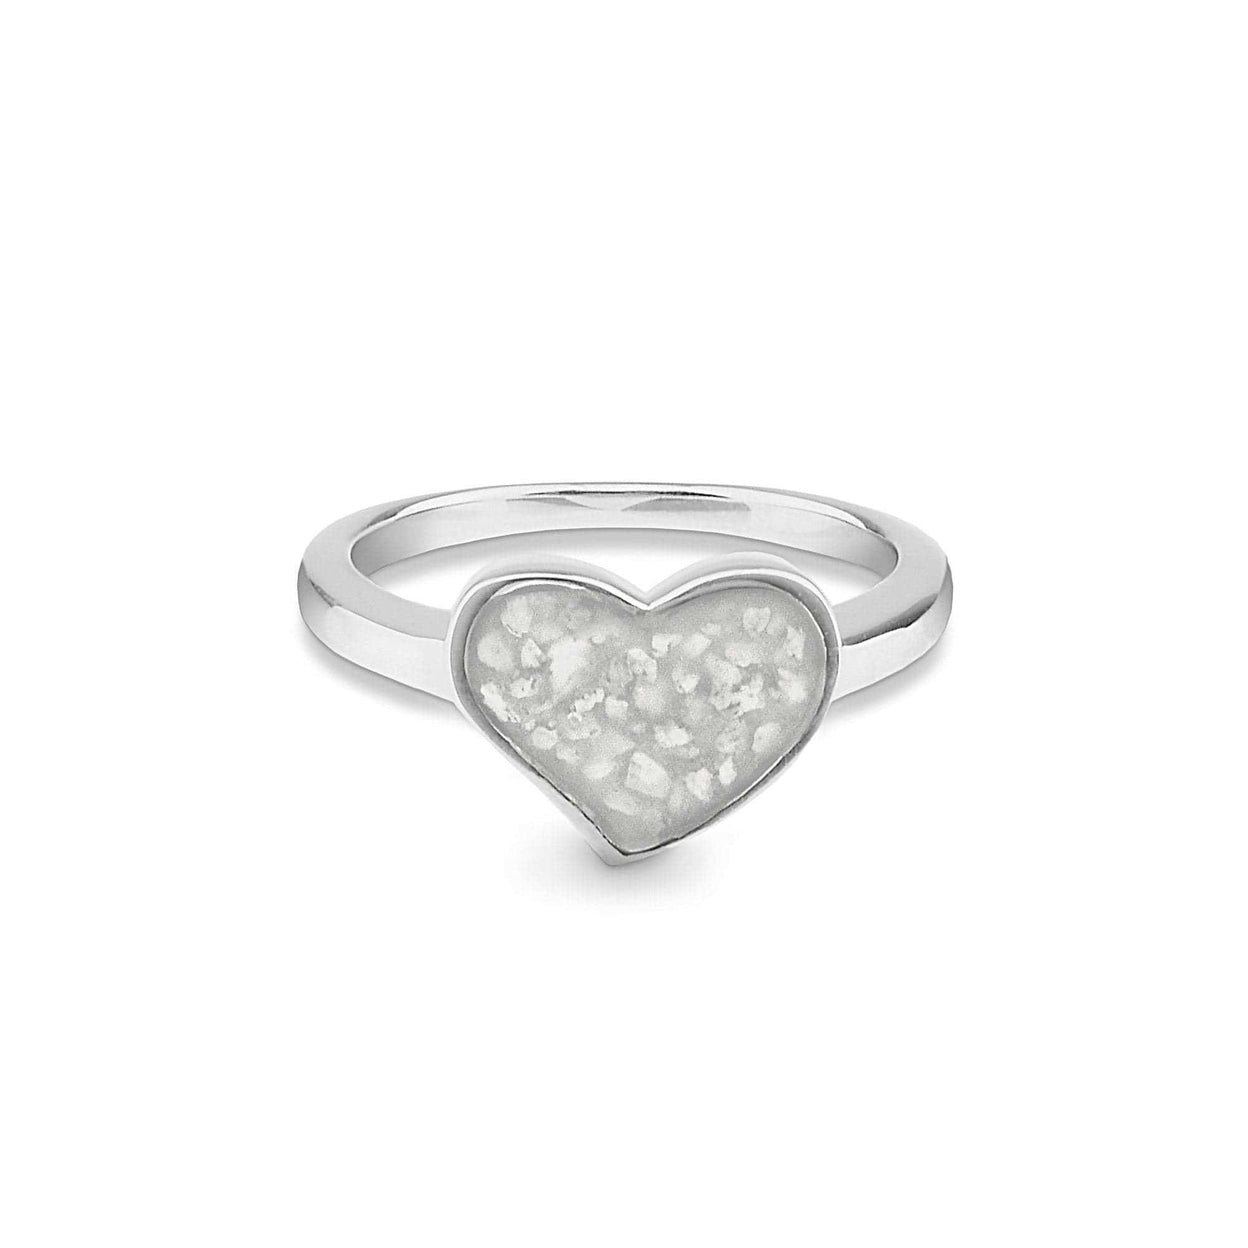 Load image into Gallery viewer, EverWith Ladies Oversized Heart Memorial Ashes Ring